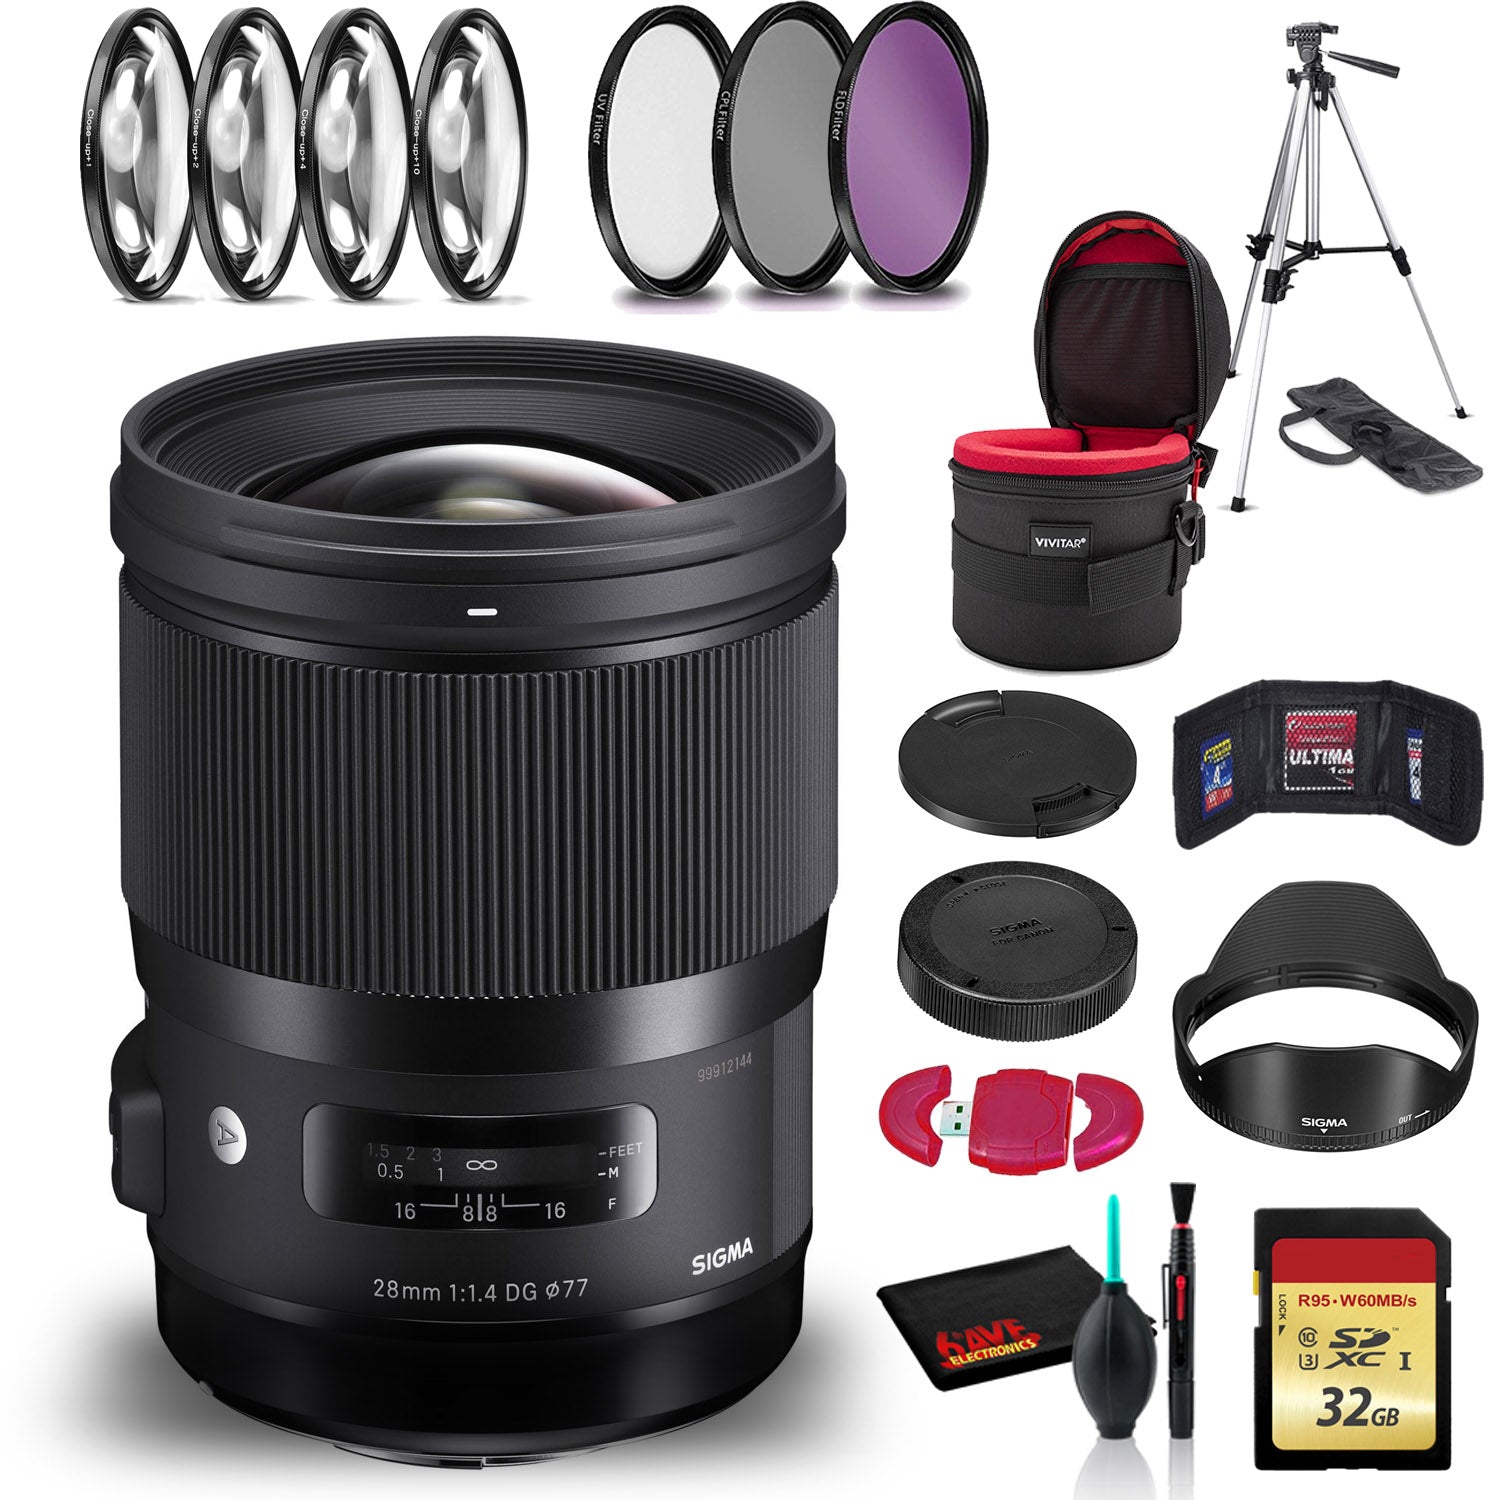 Sigma 28mm f/1.4 DG HSM Art Lens for Canon EF with Cleaning Kit, Full Size Tripod, 32GB Memory Kit, Filter Kit, and Case